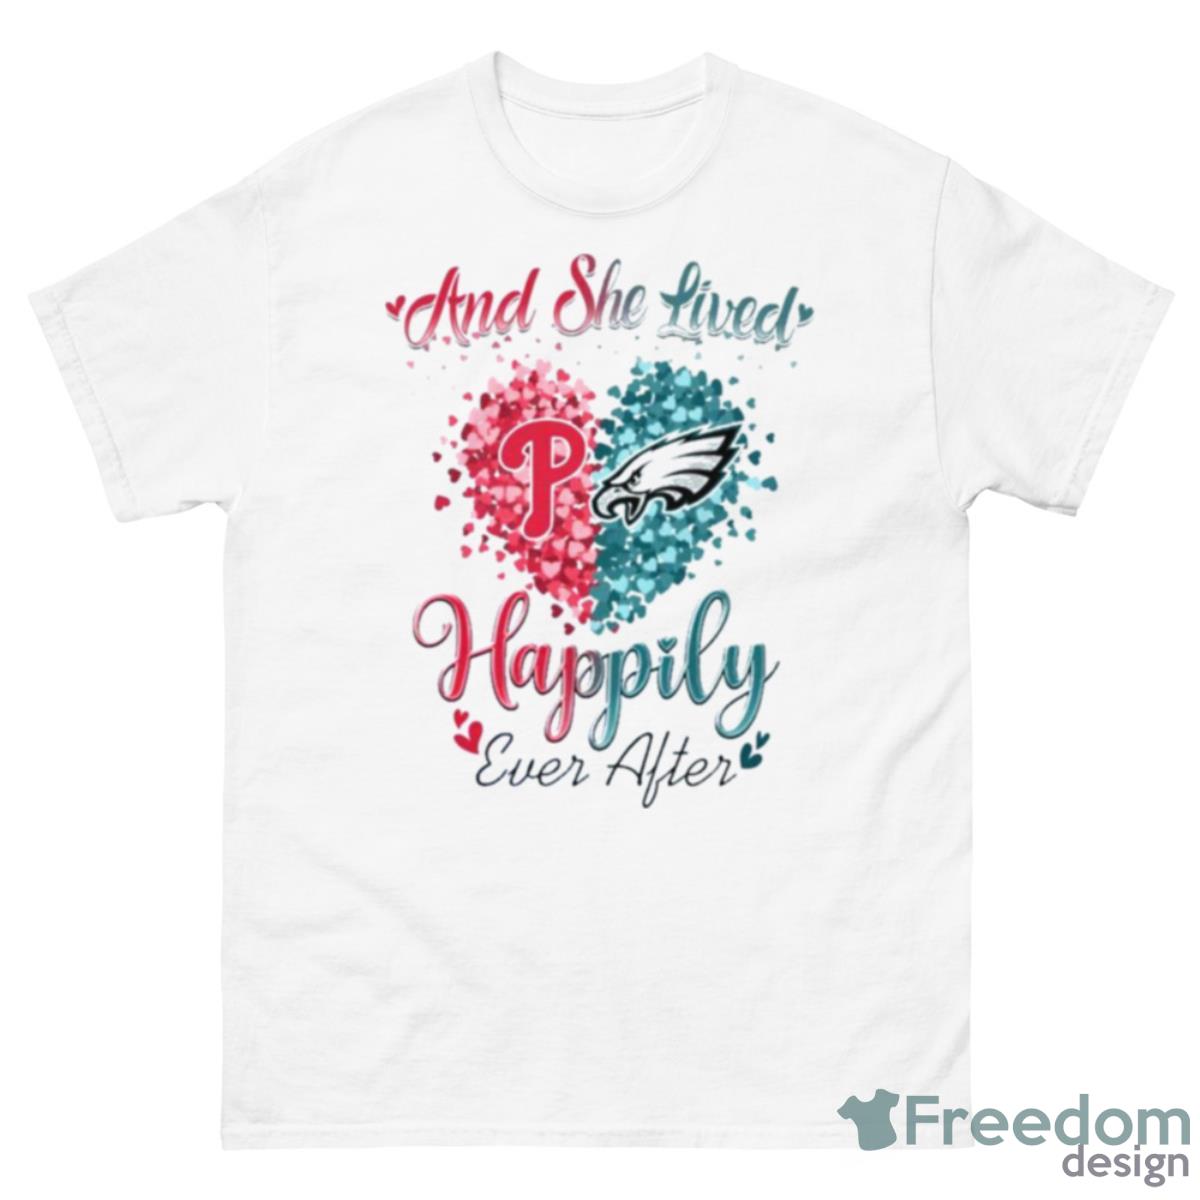 Philadelphia Phillies And Philadelphia Eagles And She Lived Happily Ever After Shirt - 500 Men’s Classic Tee Gildan